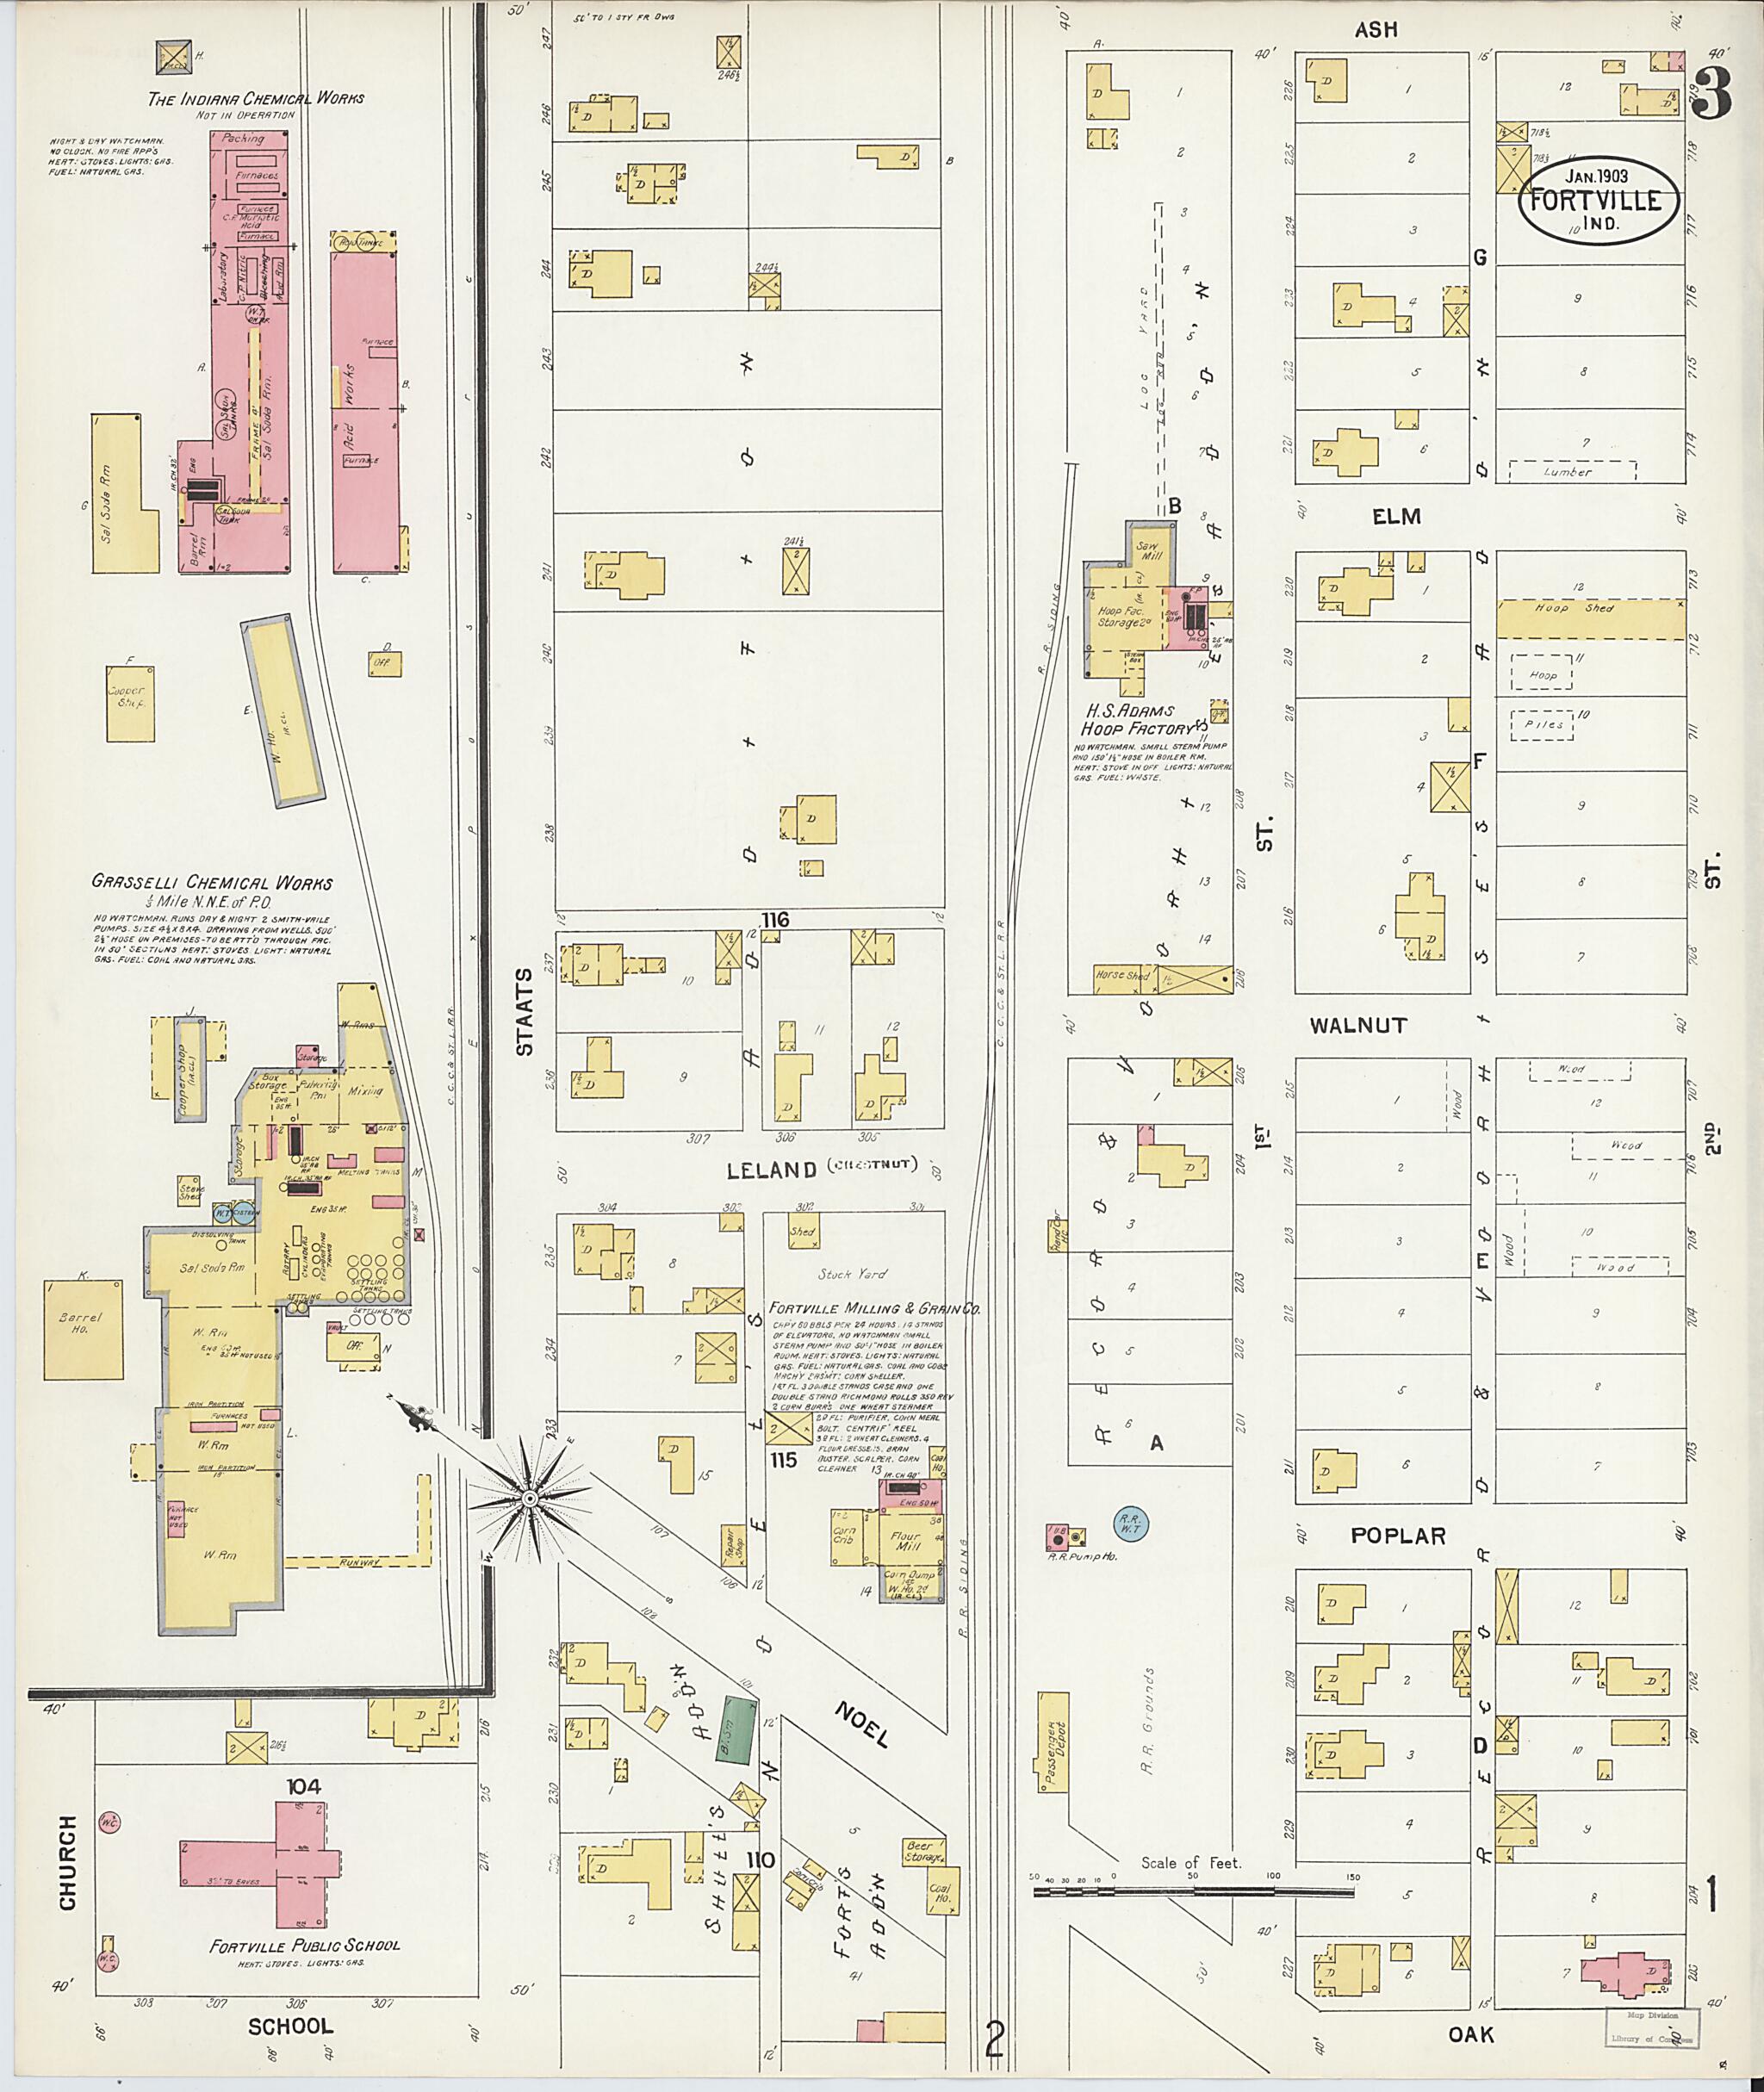 This old map of Fortville, Hancock County, Indiana was created by Sanborn Map Company in 1903